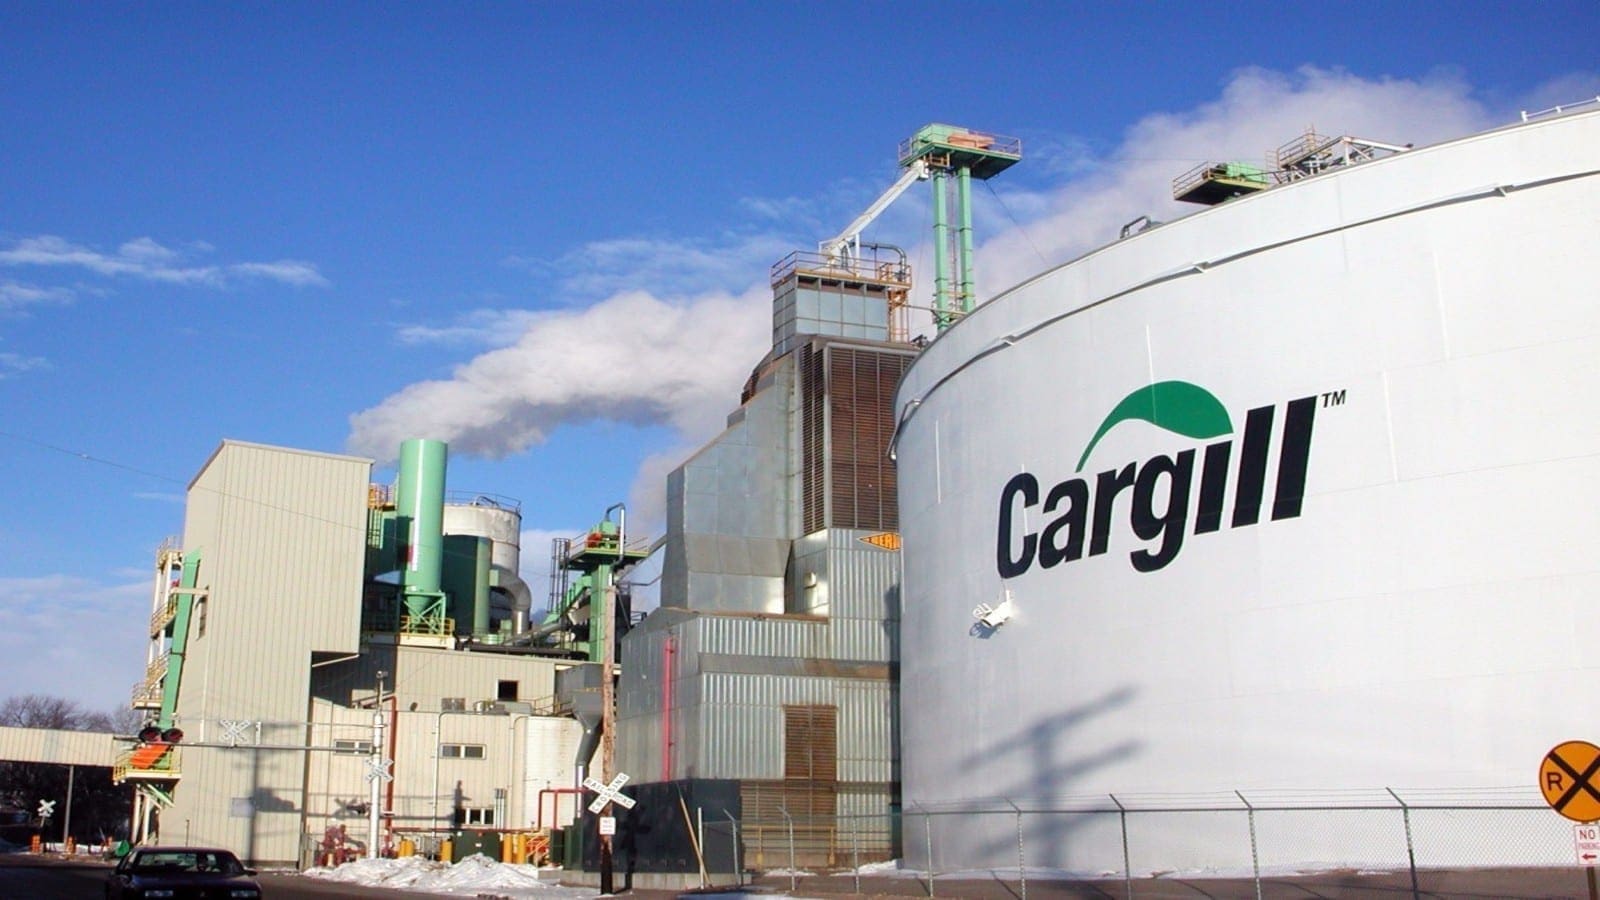 Cargill to construct US$150M biofuel company to fight climate change